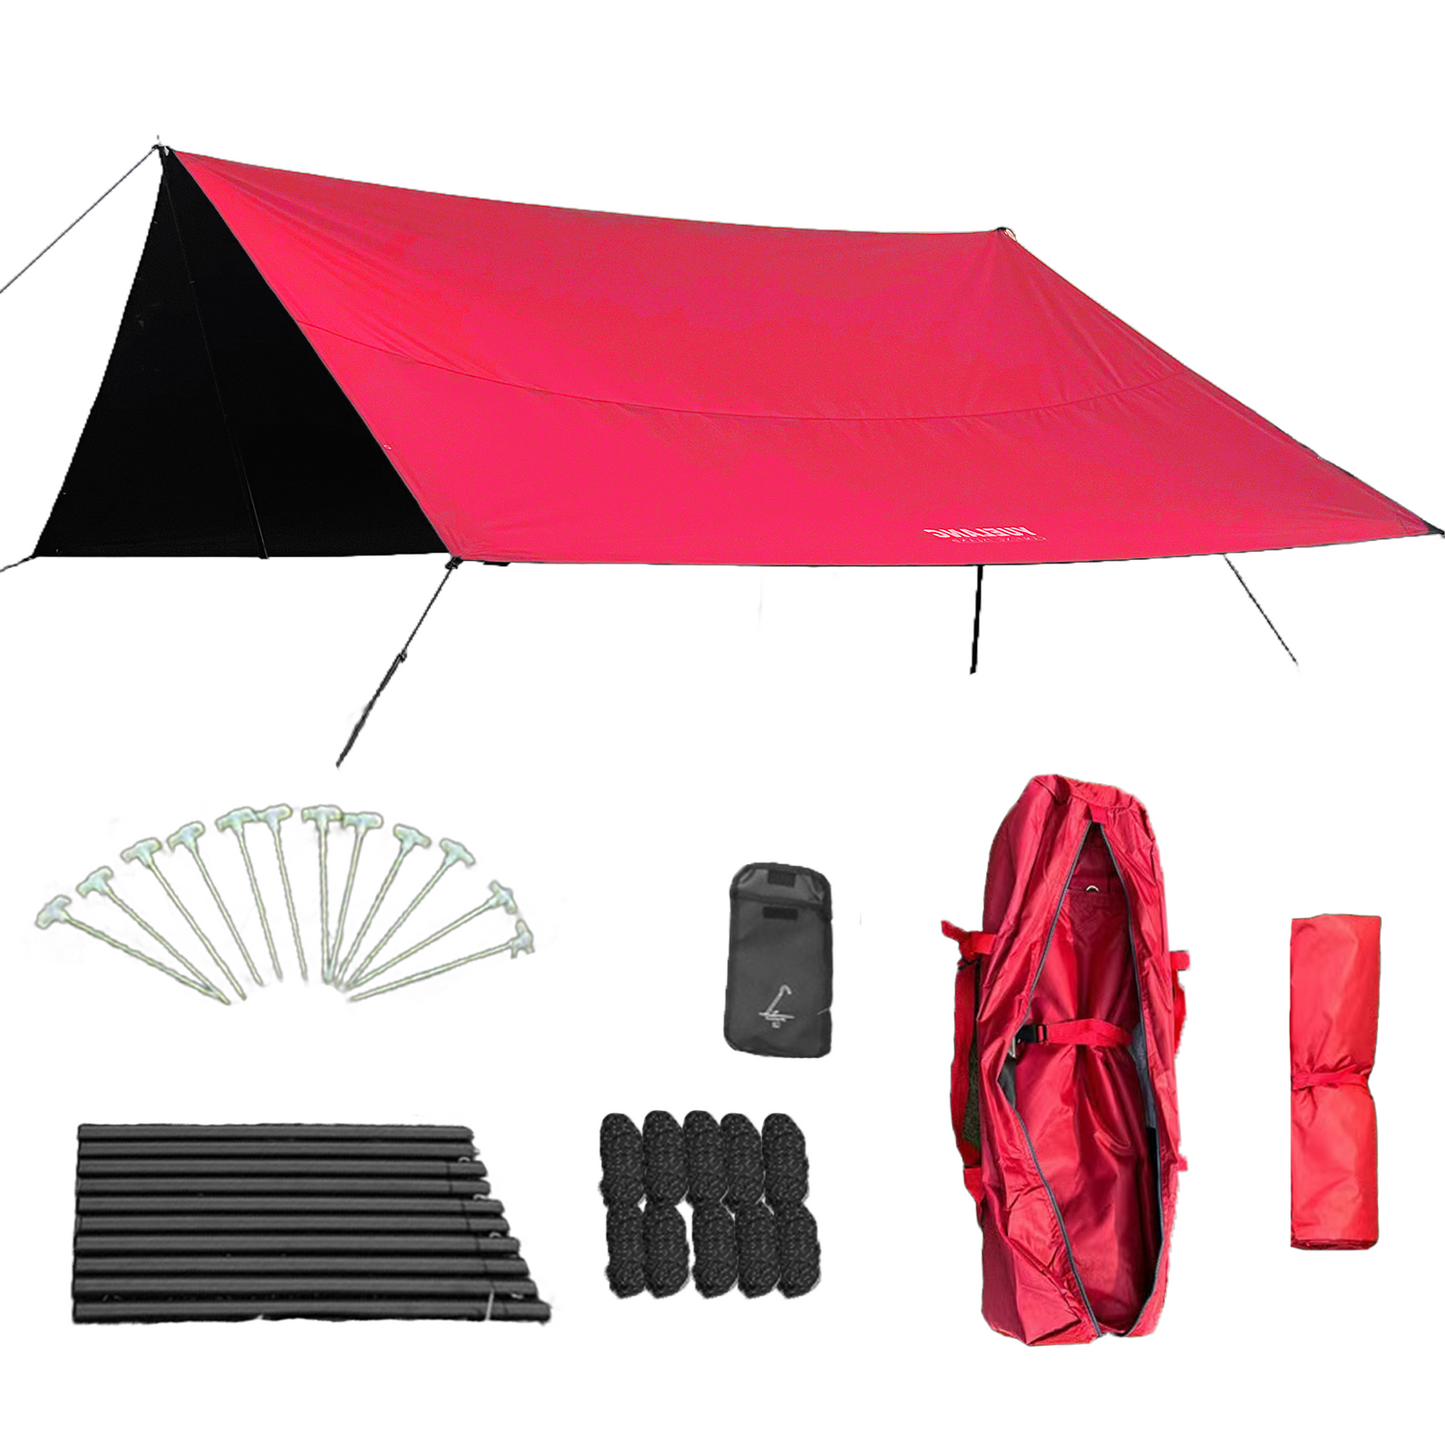 18× 14FT Waterproof Large Camping Tent Tarp for 10- 14 Person - Black/ White/ Red